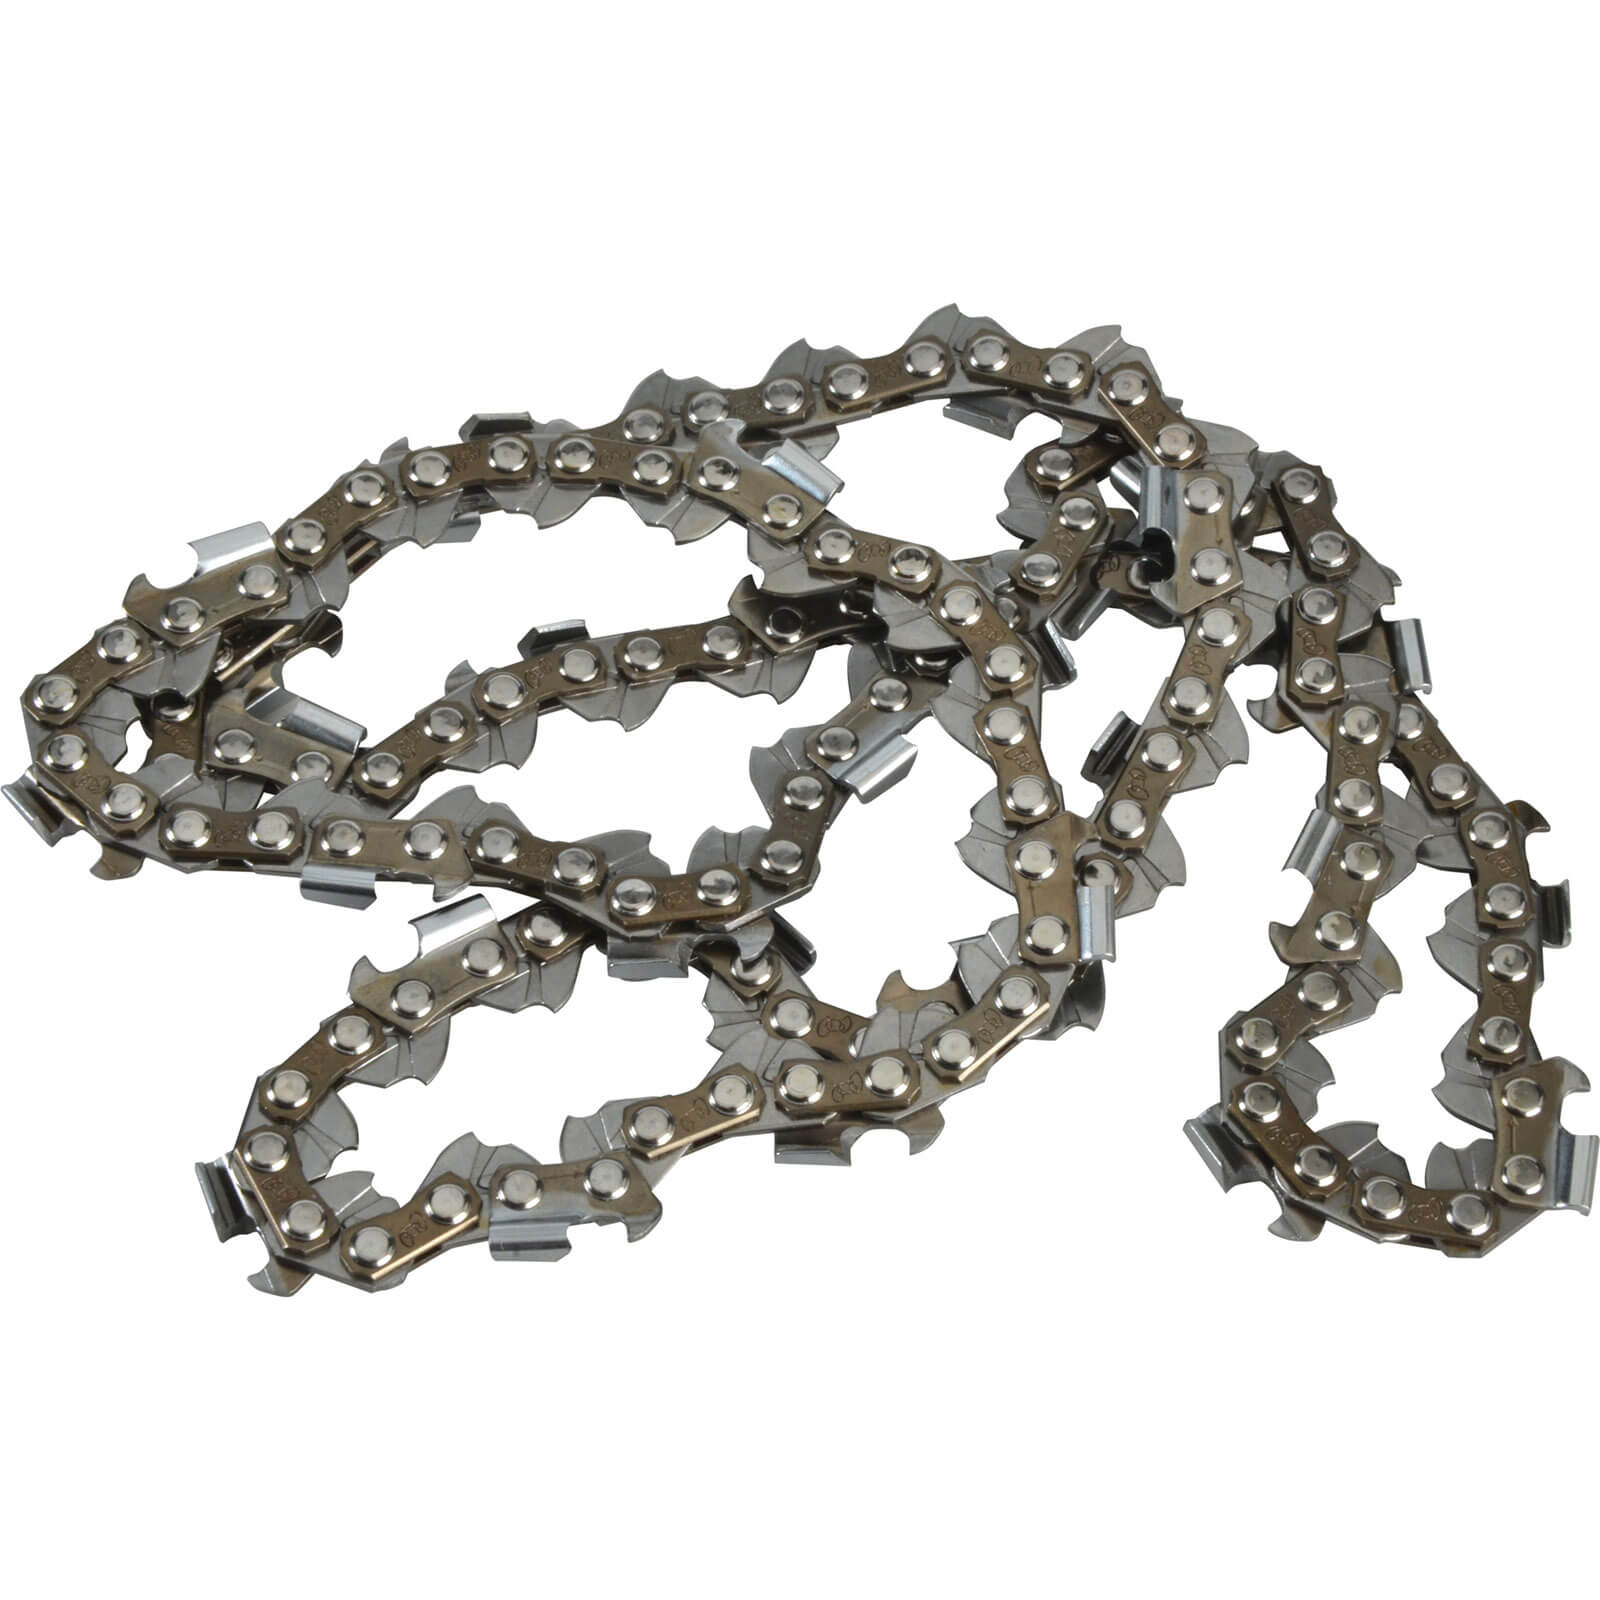 Photo of Alm Ch064 Replacement Chainsaw Chain Fits Saws With A 40cm Bar And 64 Drive Links 400mm